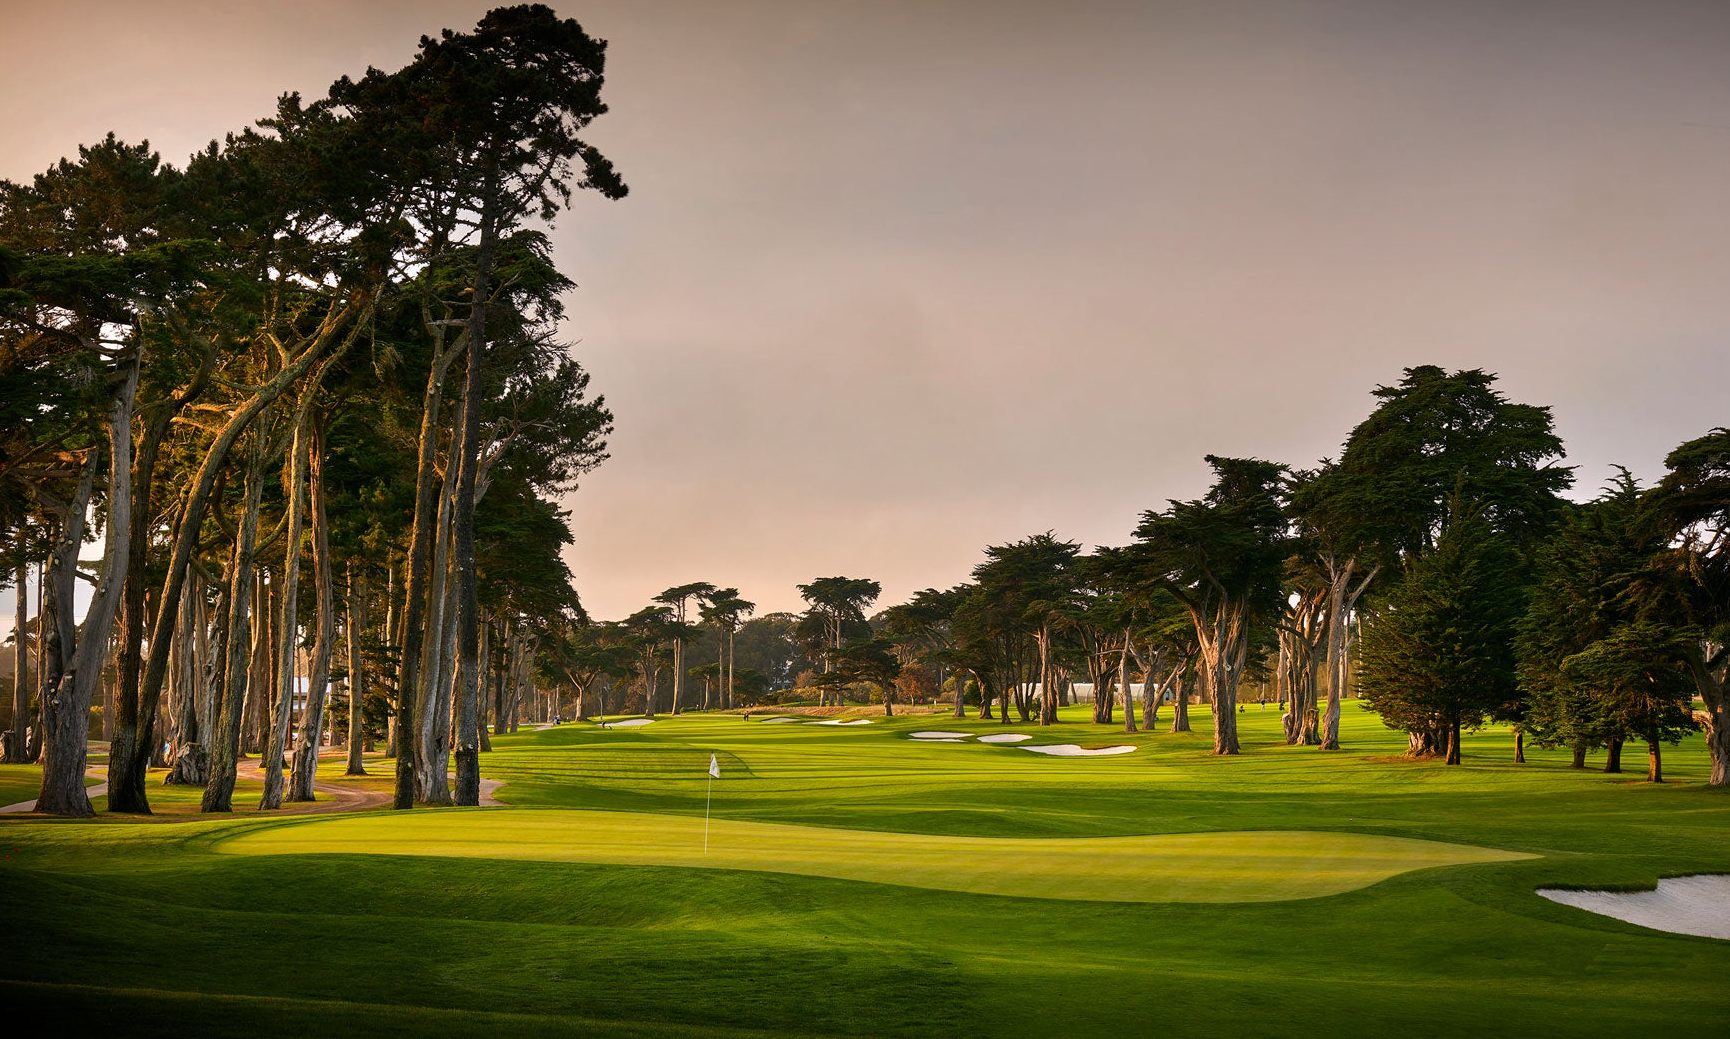 TPC Harding Park in San Francisco is a resplendent golf course dating back to the 1920s. It was designed and brought to fruition by William Watson from Kemback near Cupar.